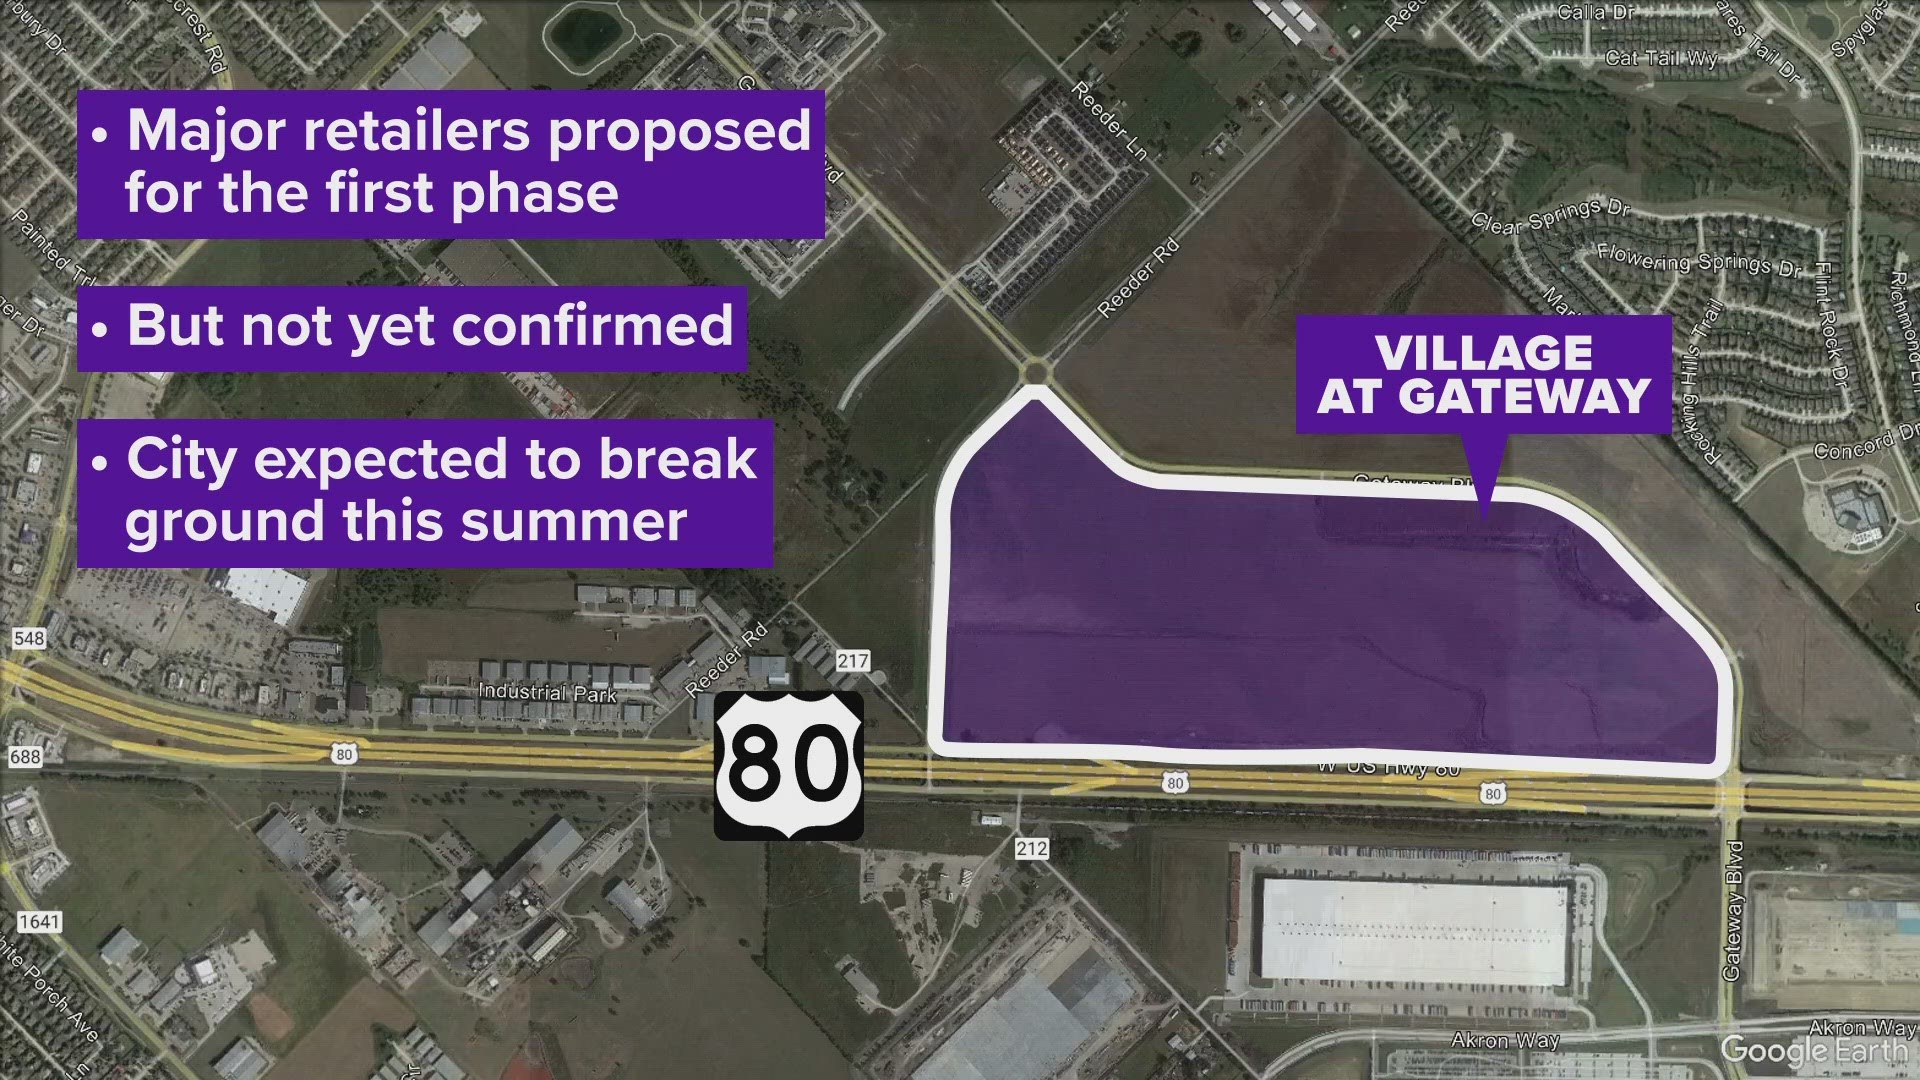 Forney expects to break ground on the shopping center this summer